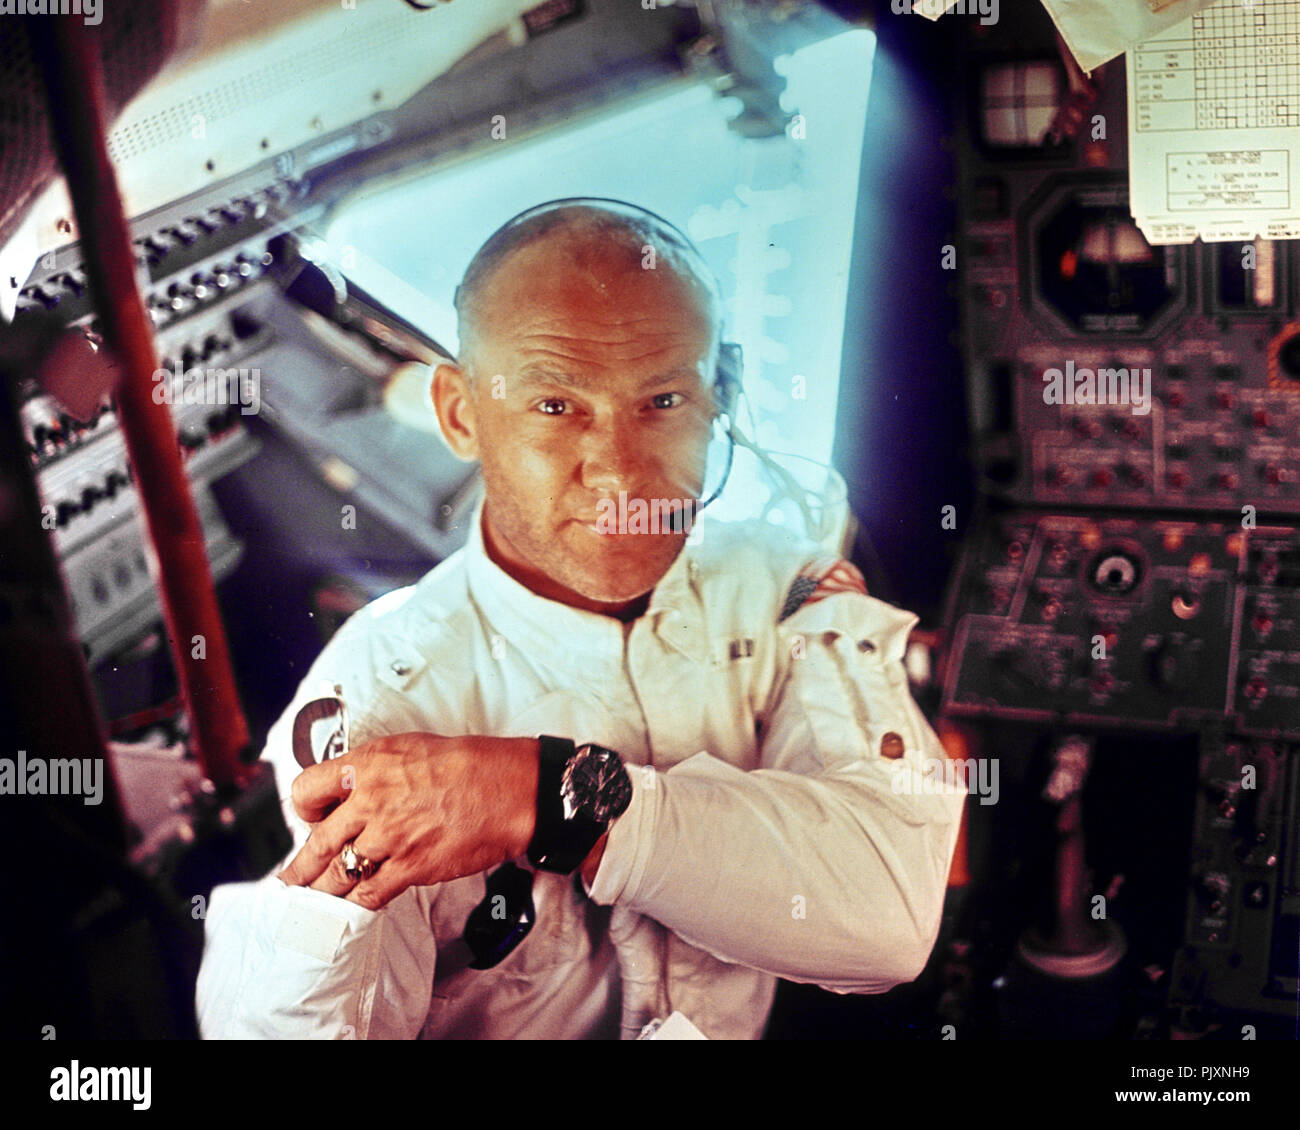 In Lunar Orbit - (FILE) -- This interior view of the Apollo 11 Lunar Module Eagle shows Astronaut Edwin E. Aldrin, Jr., lunar module pilot, during the lunar landing mission. This picture was taken by Astronaut Neil A. Armstrong, commander, prior to the moon landing on Sunday, July 20, 1969.  Credit: NASA via CNP /MediaPunch Stock Photo